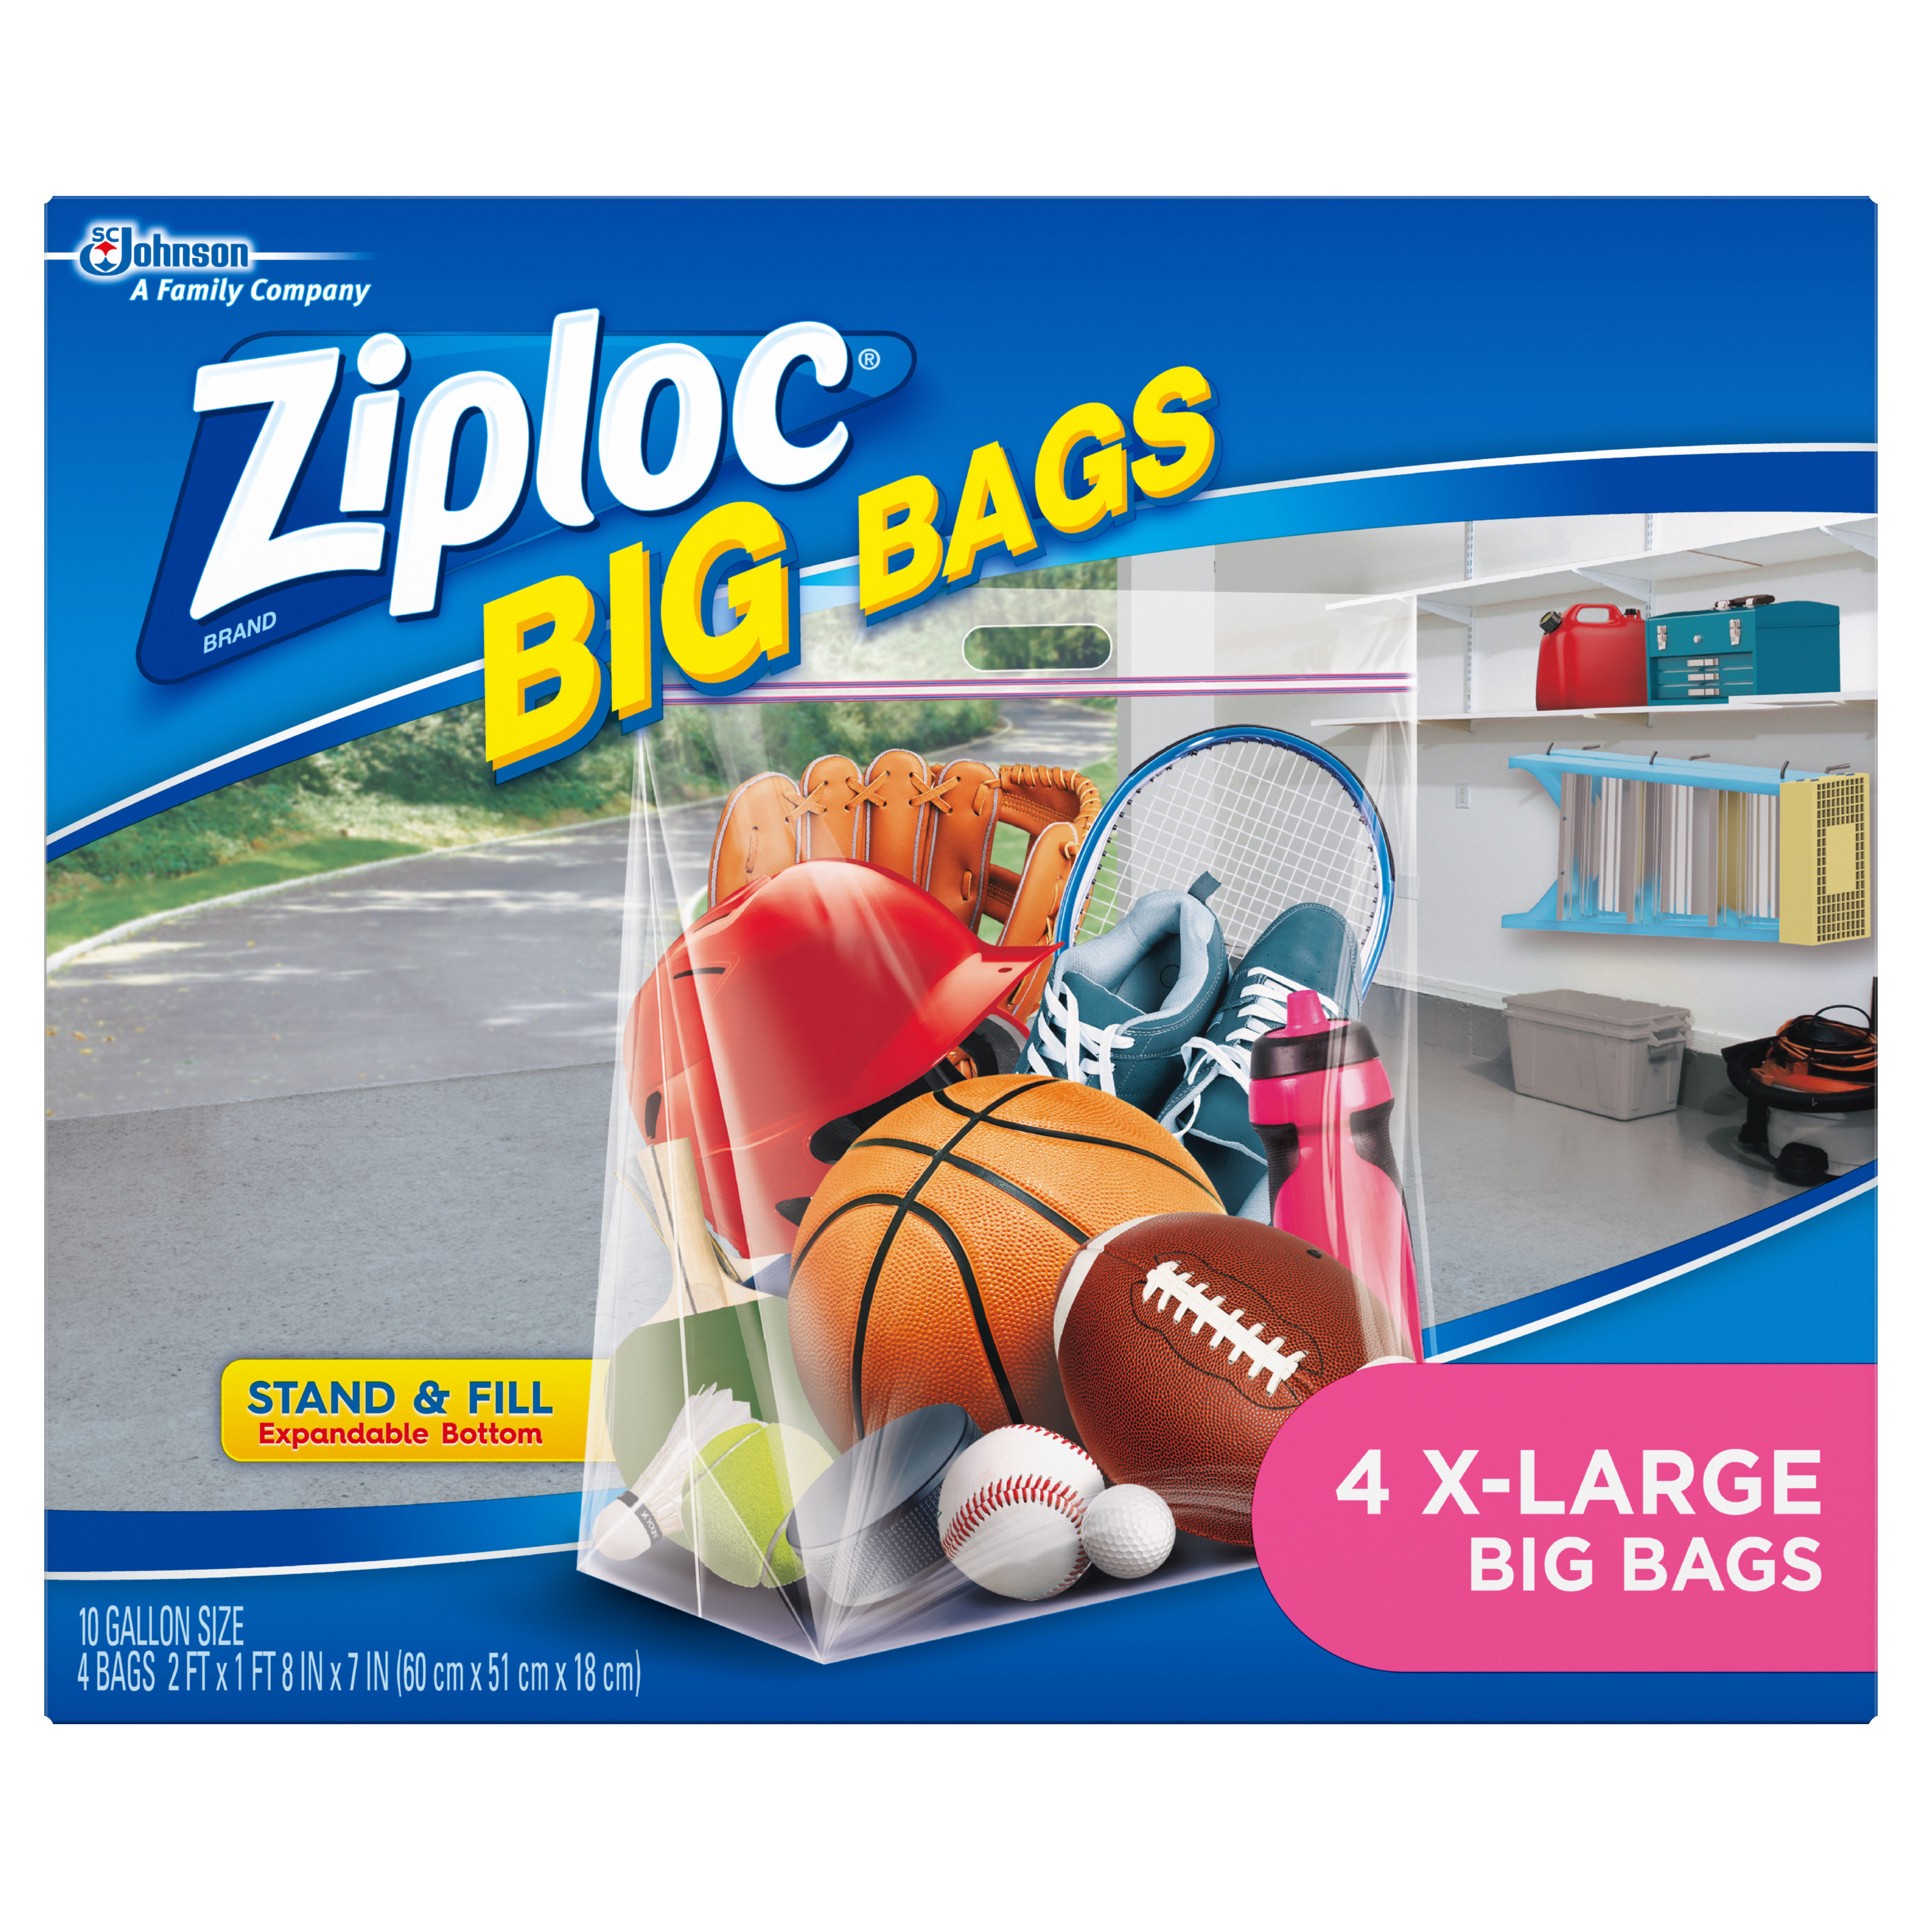 slide 1 of 5, Ziploc Big Bags, X-Large, Secure Double Zipper, 4 CT, Expandable Bottom, Heavy-Duty Plastic, Built-In Handles, Flexible Shape to Fit Where Storage Boxes Can't, 4 ct